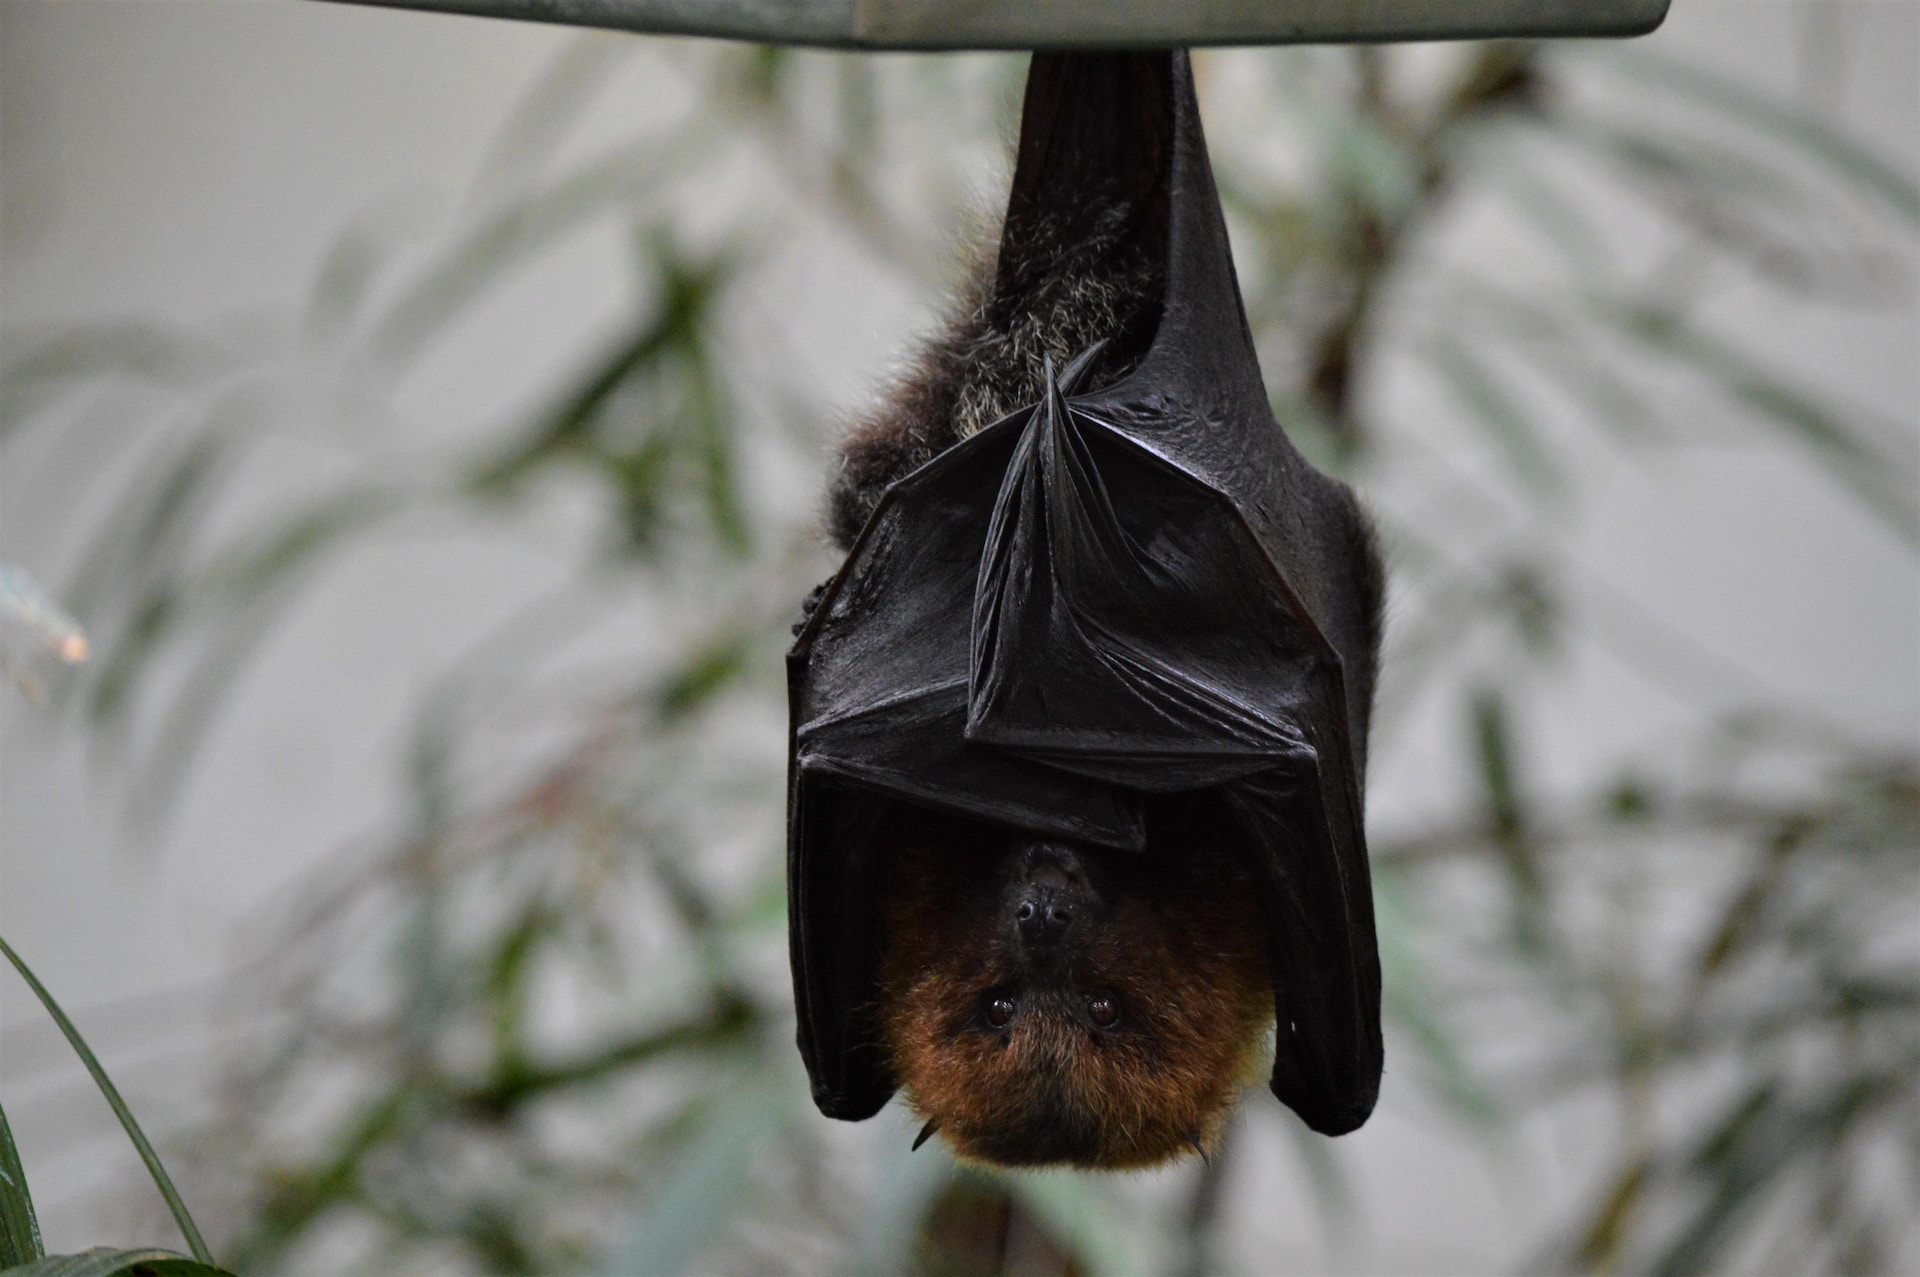 A bat hanging upside down in an open space.